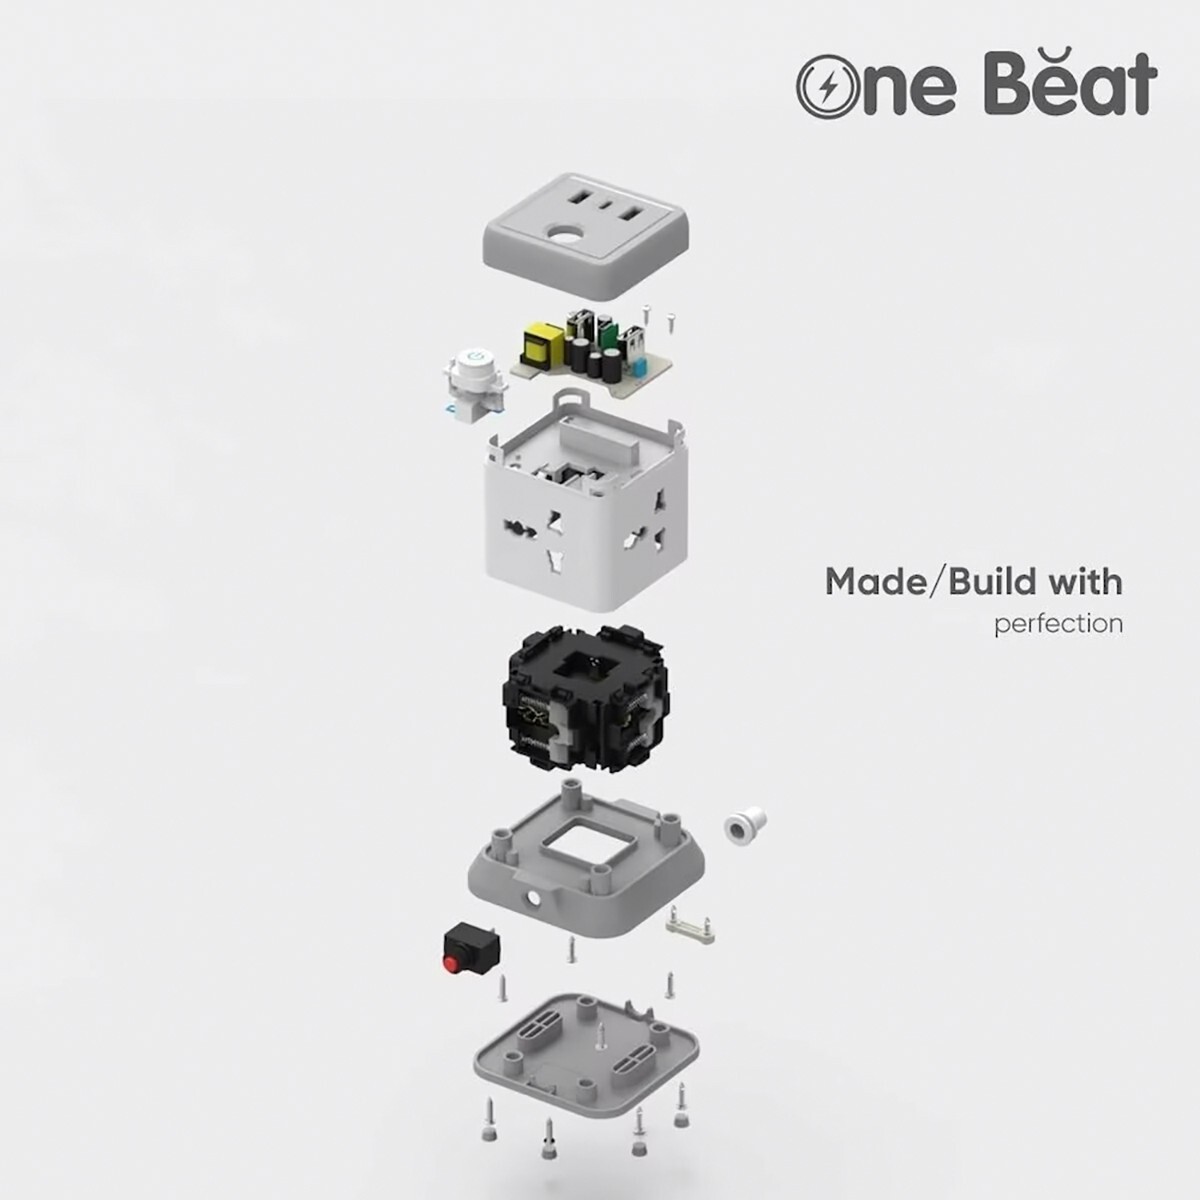 One Beat Plug Extention Cube 7in1 2M OB20432-U